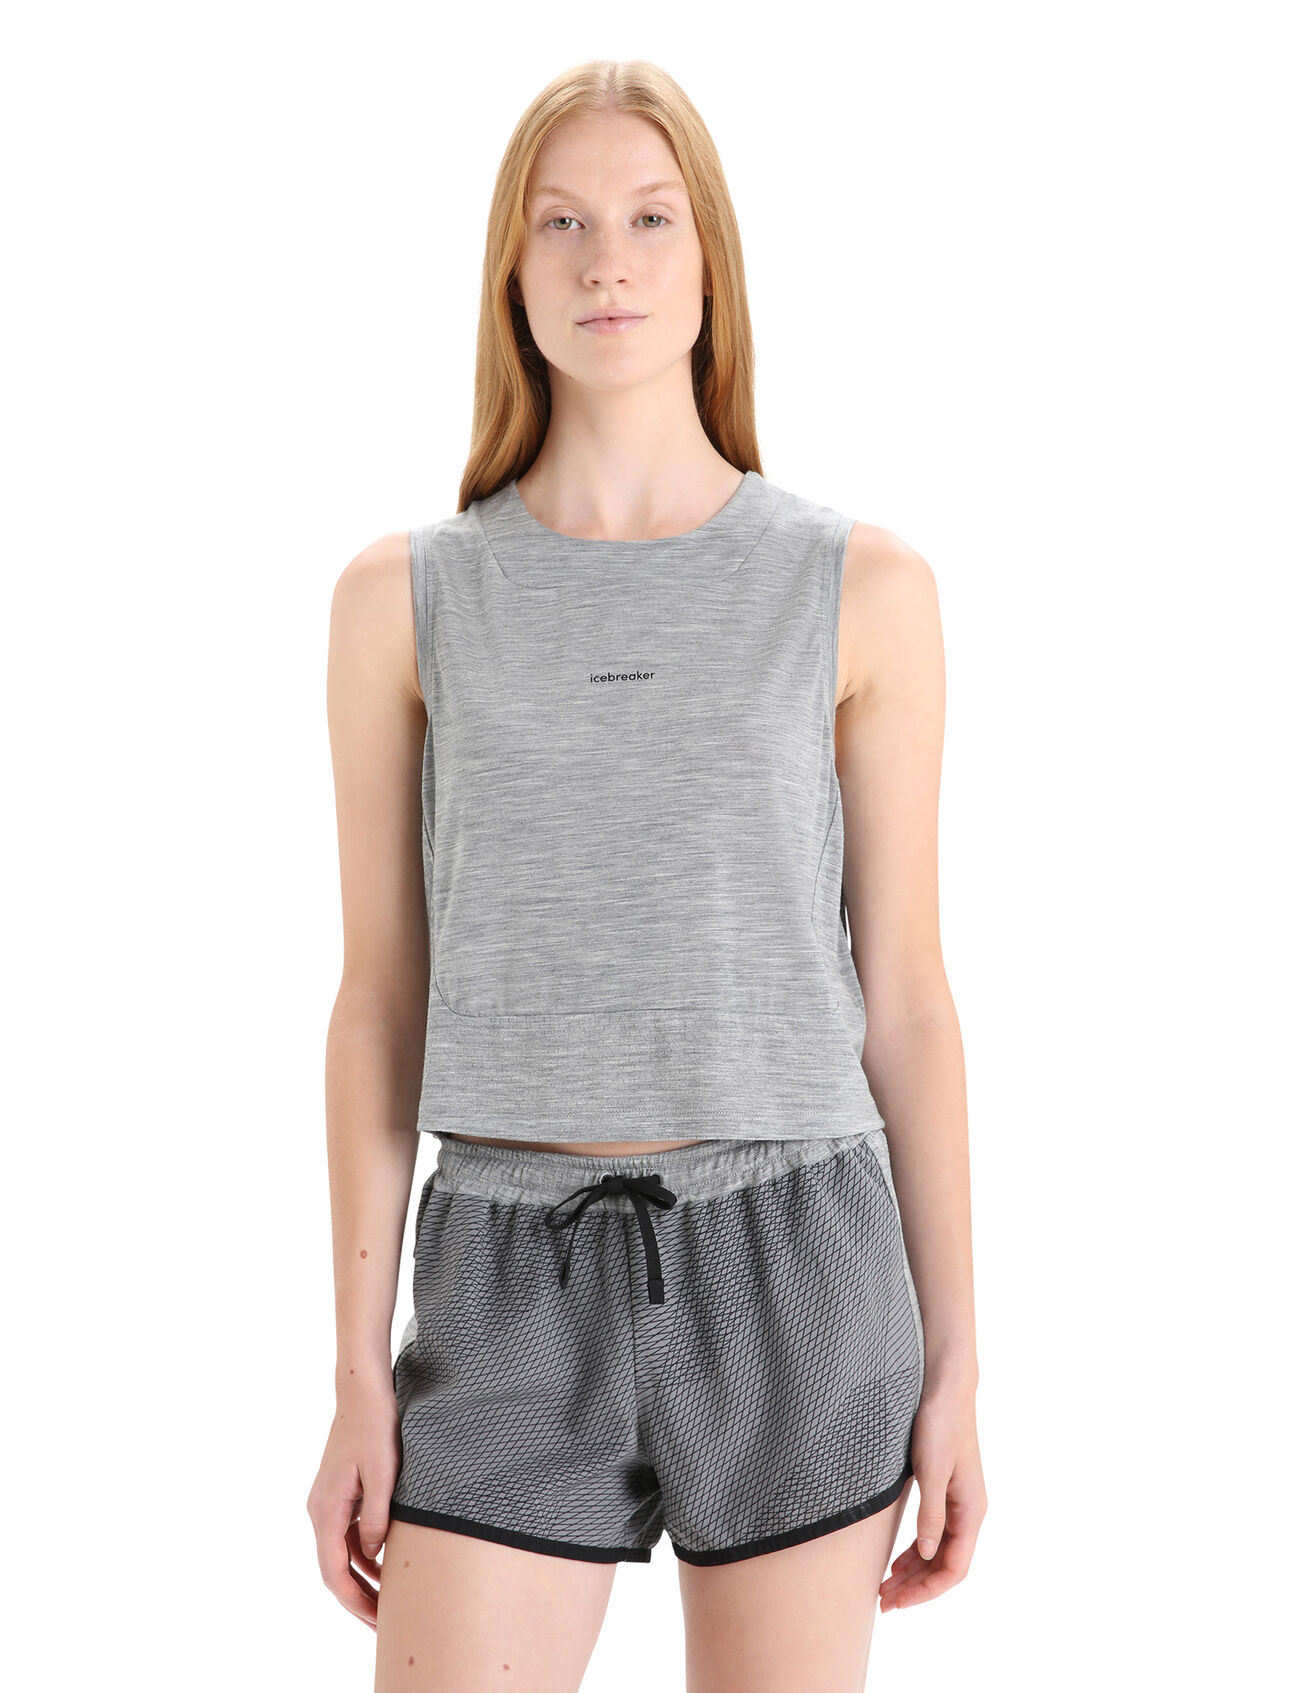 Womens ZoneKnit™ Merino Tank Our most breathable and lightweight tank top for high-exertion activities, the ZoneKnit™ Tank features a clean design with mesh panels to help regulate your body temperature.